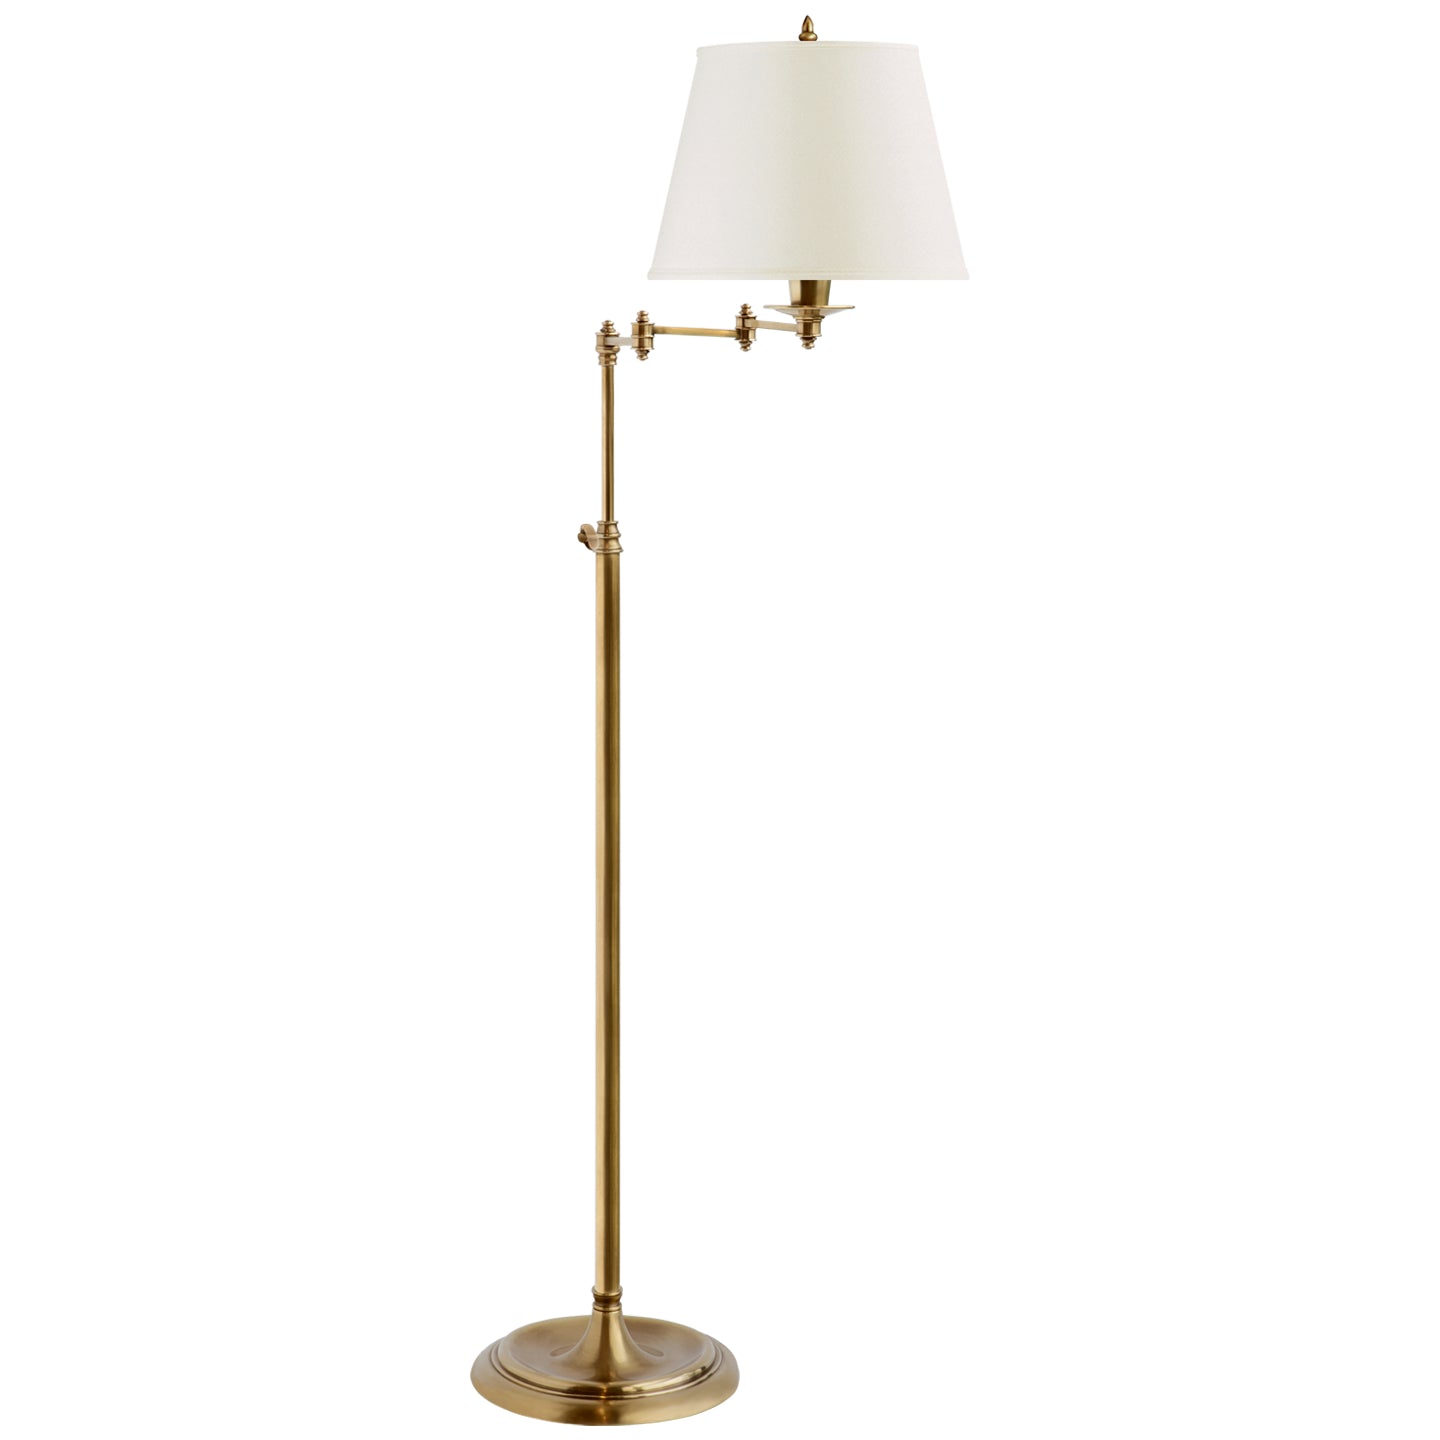 Visual Comfort Signature - S 1200HAB-L - One Light Floor Lamp - Candle Stick - Hand-Rubbed Antique Brass